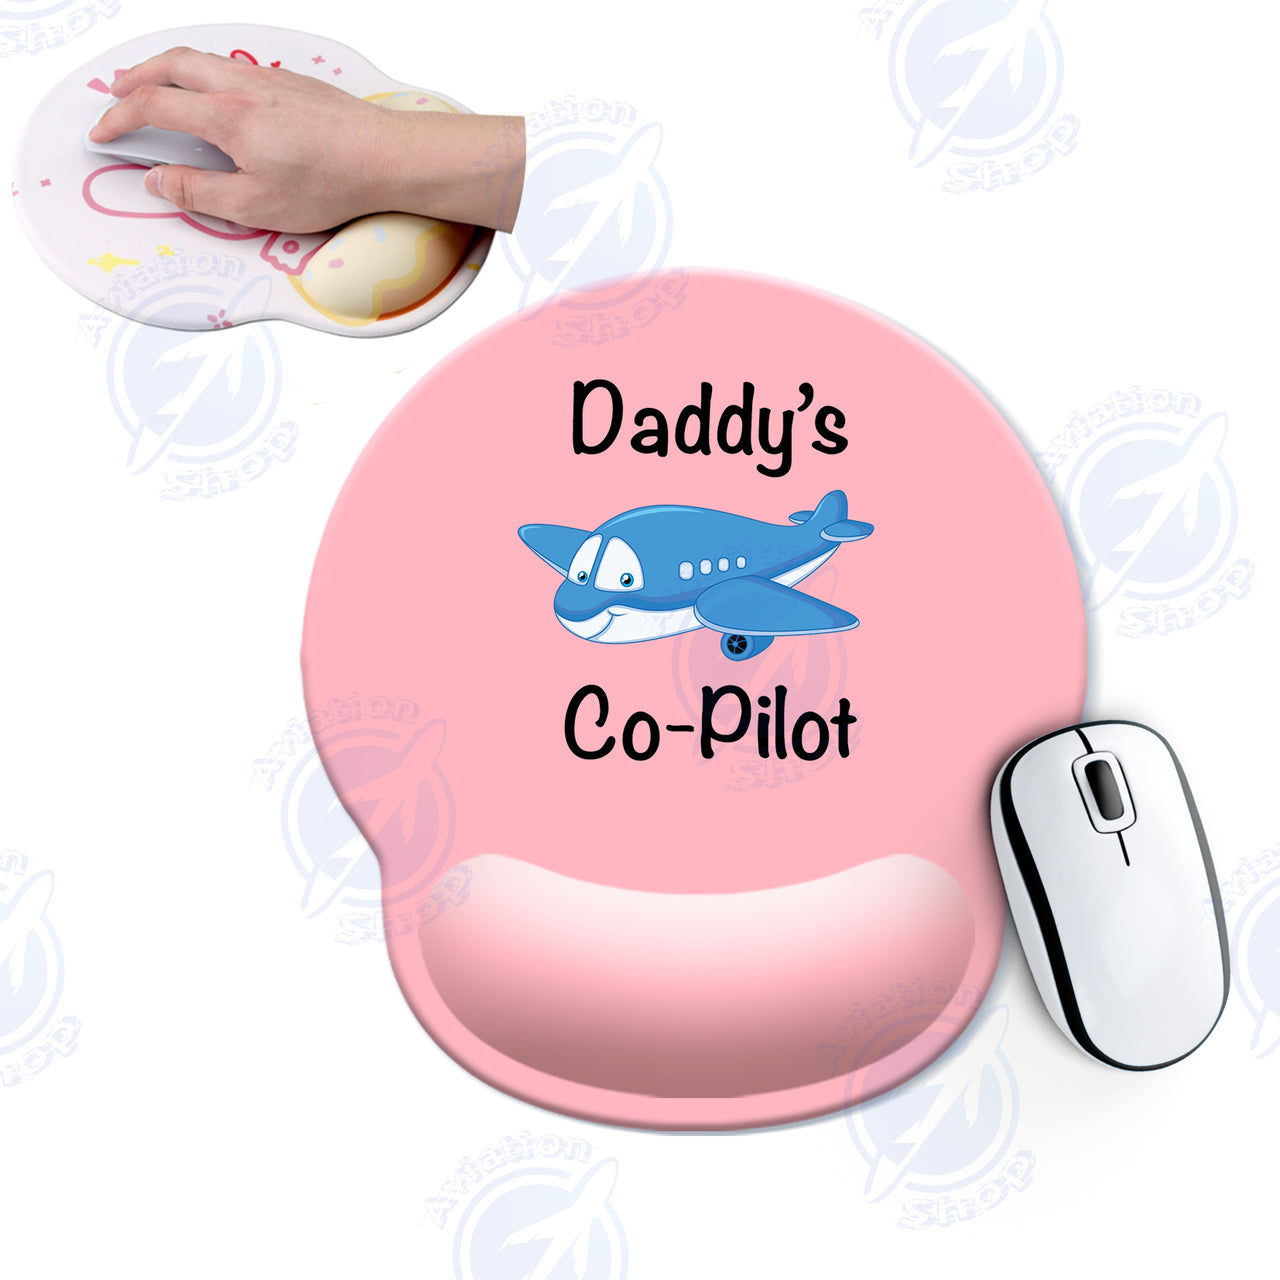 Daddy's Co-Pilot (Jet Airplane) Designed Ergonomic Mouse Pads